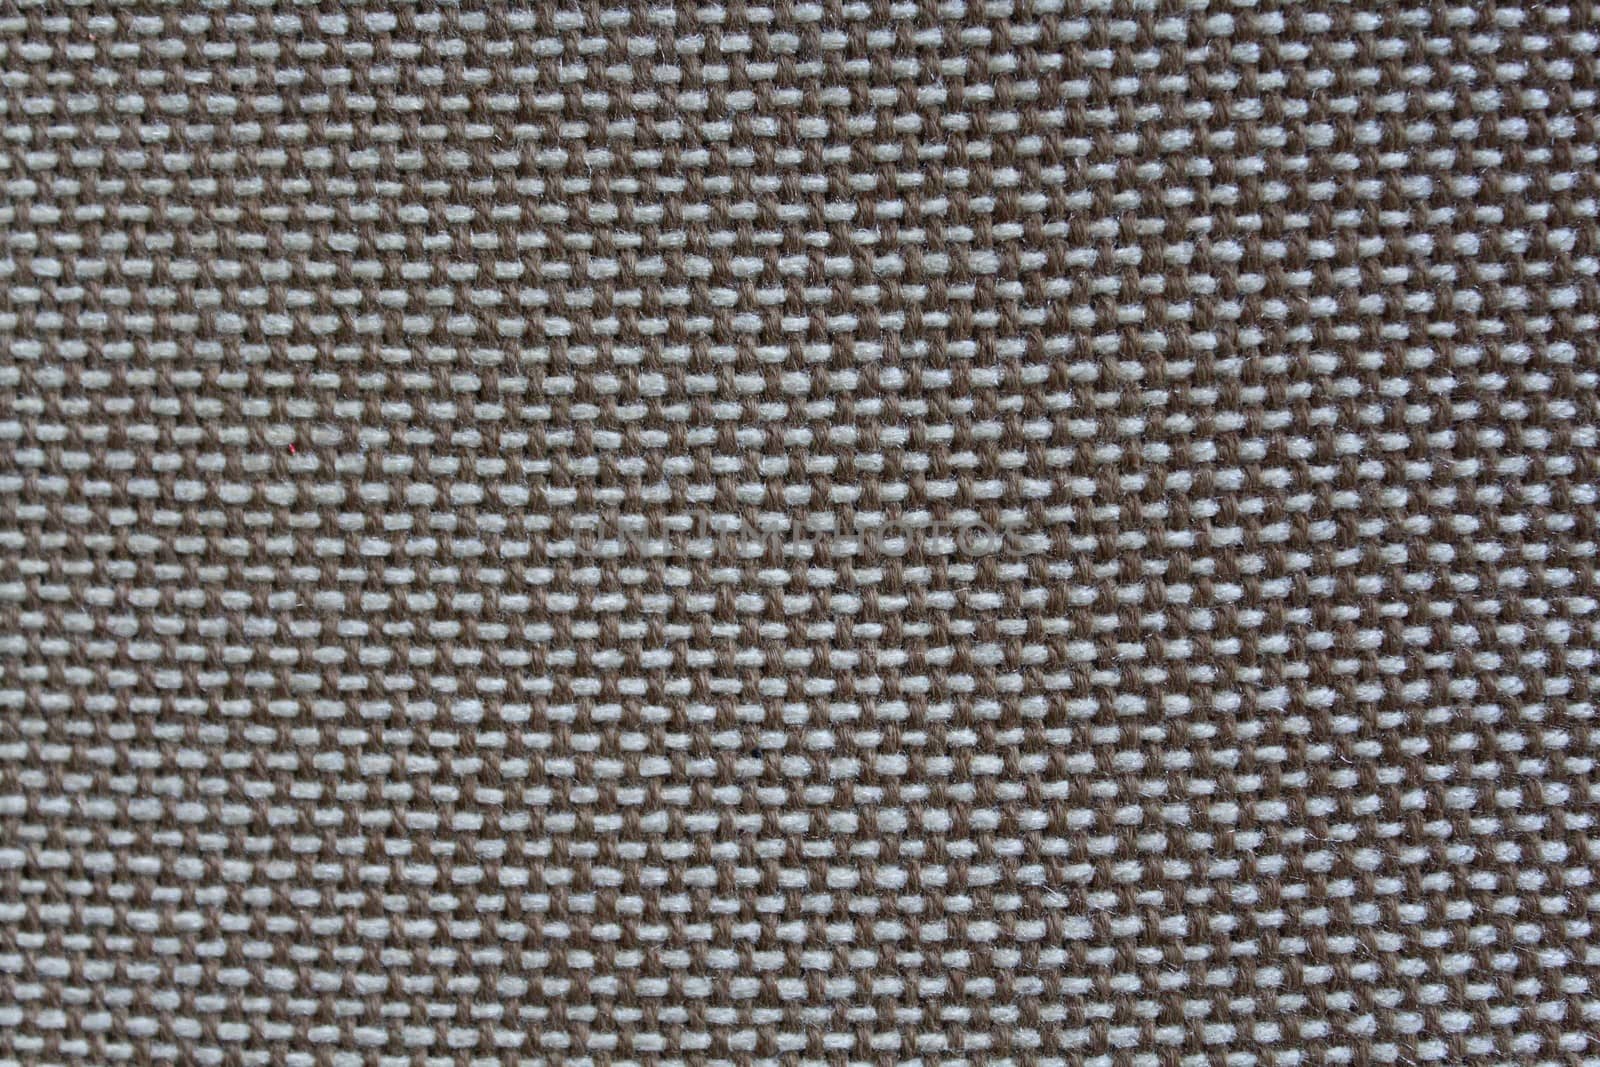 The picture shows a black and white textile background